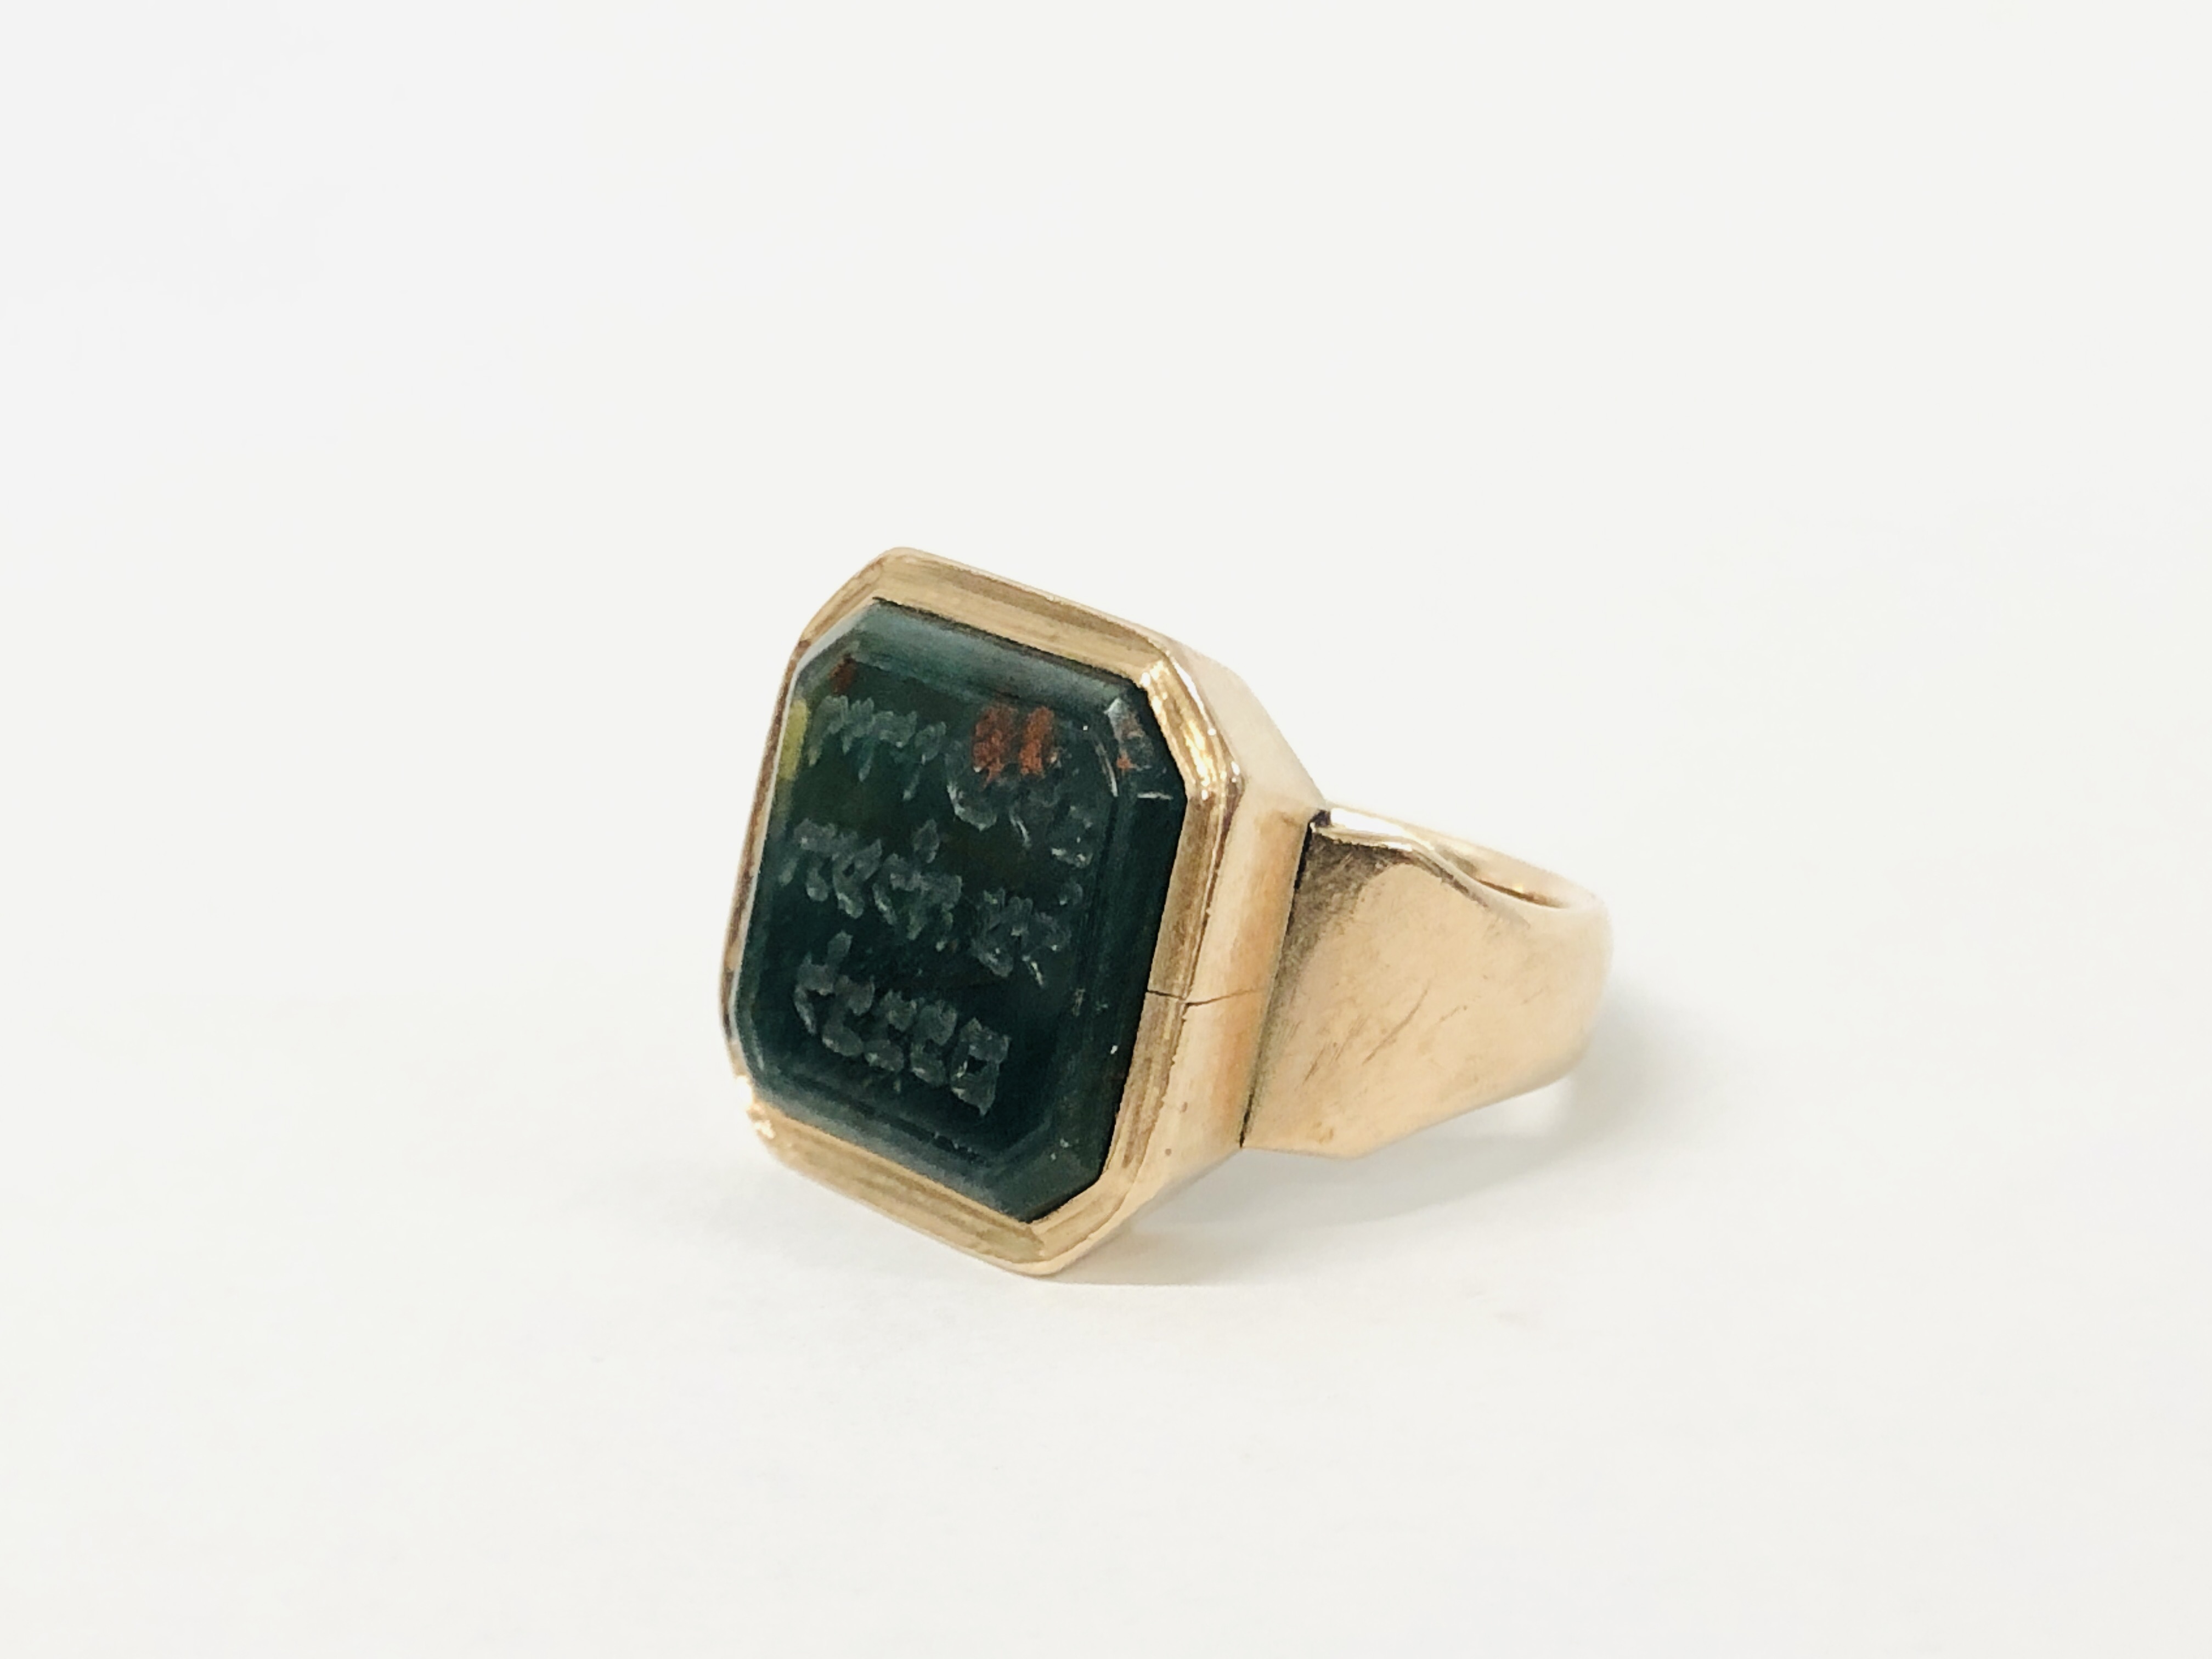 A YELLOW METAL RING & BLOODSTONE SIGNET RING INSCRIBED WITH HEBREW TEXT - SIZE M / N